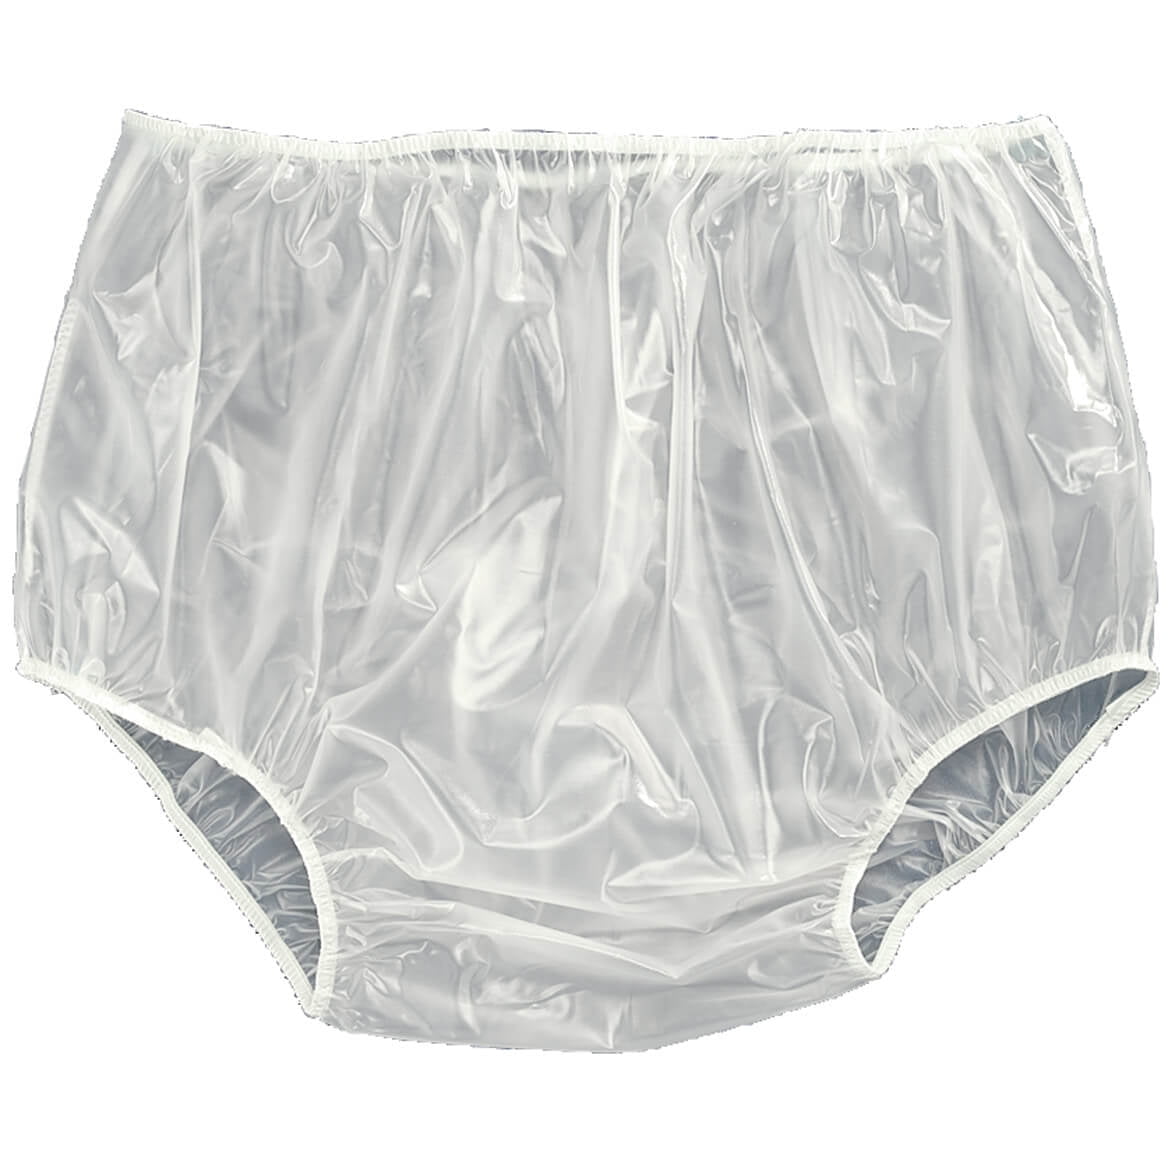  Tranquility Bariatric Disposable Briefs 4X-Large with